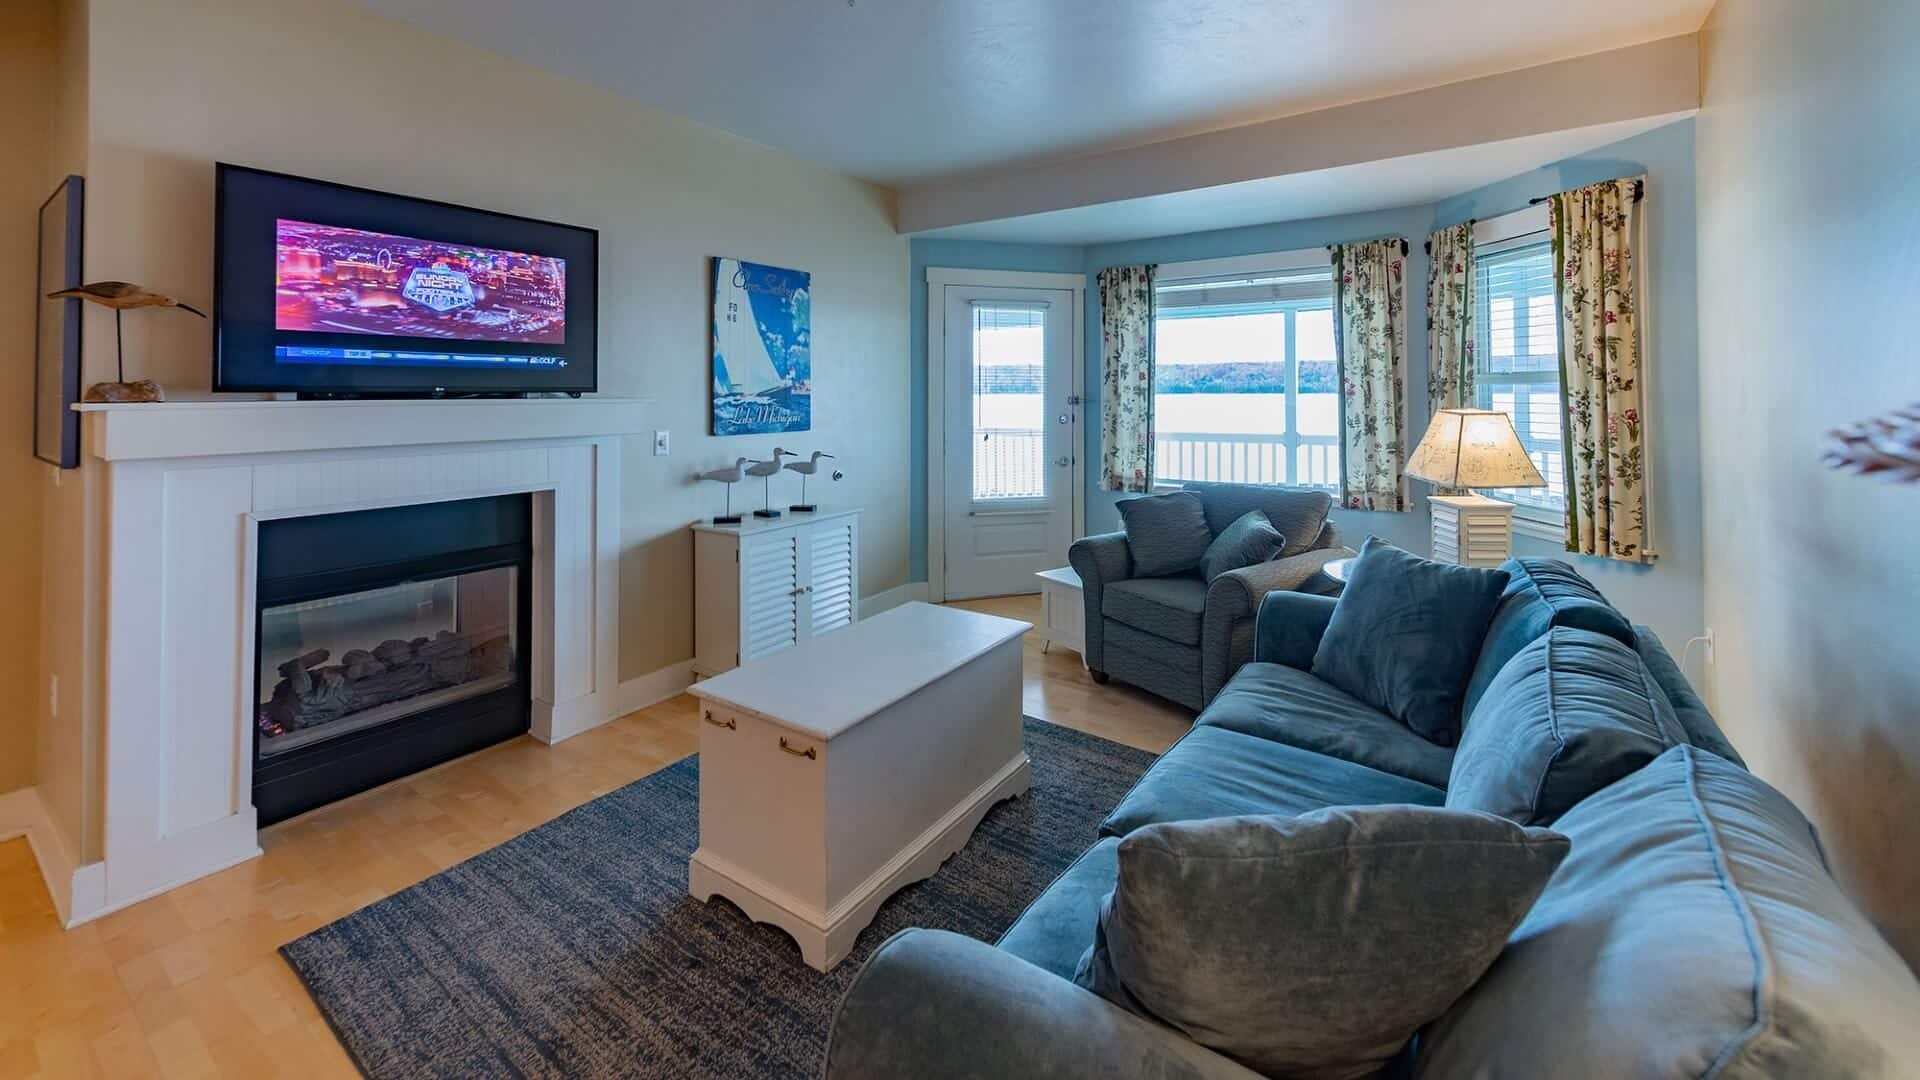 Living room with large couch, chair, coffee table, lamp, gas fireplace with TV above and bay window overlooking the water